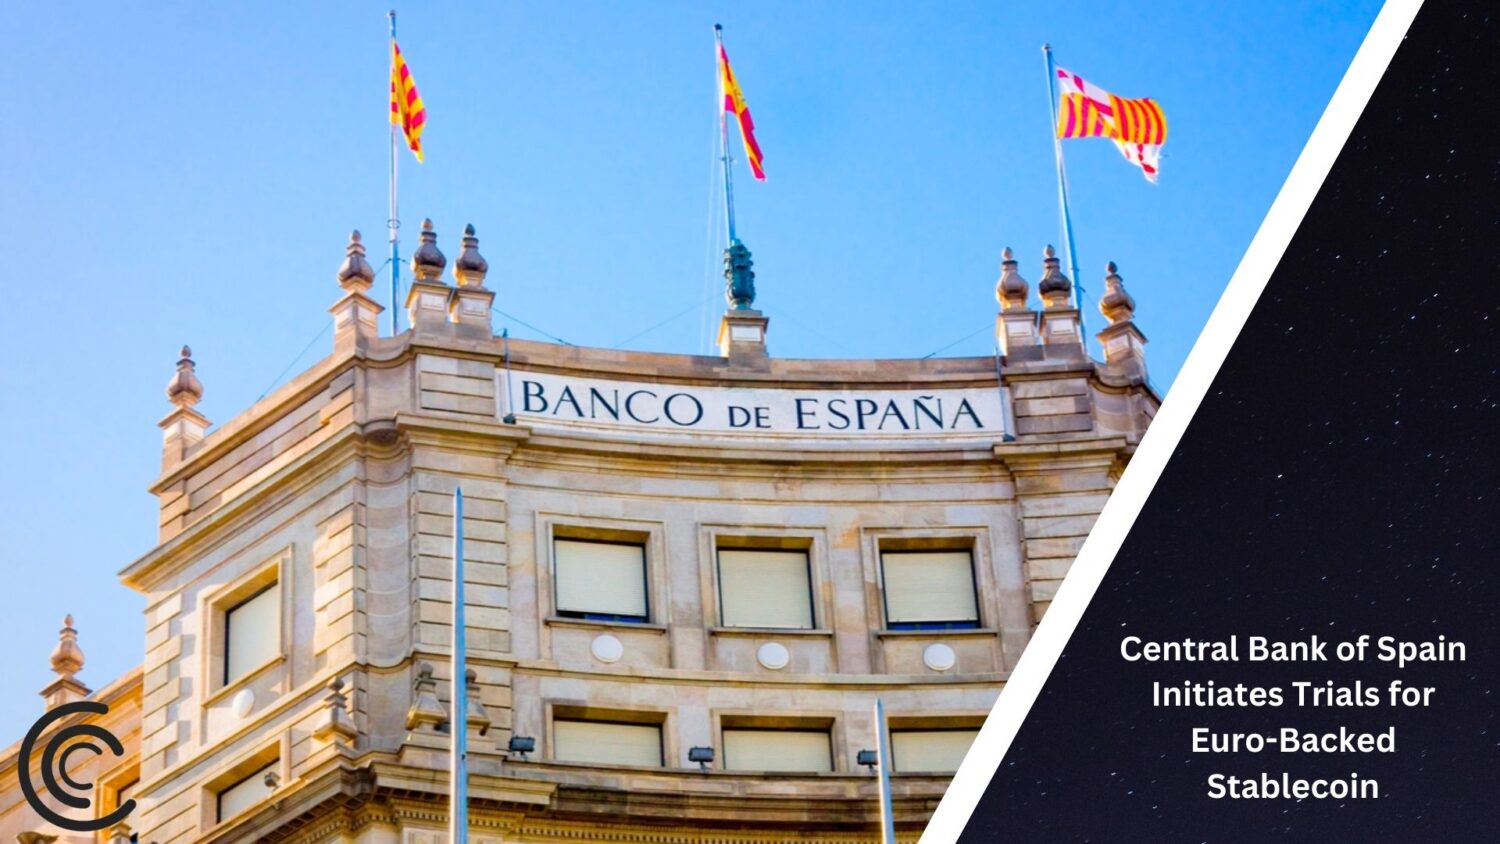 Central Bank Of Spain Initiates Trials For Euro-Backed Stablecoin